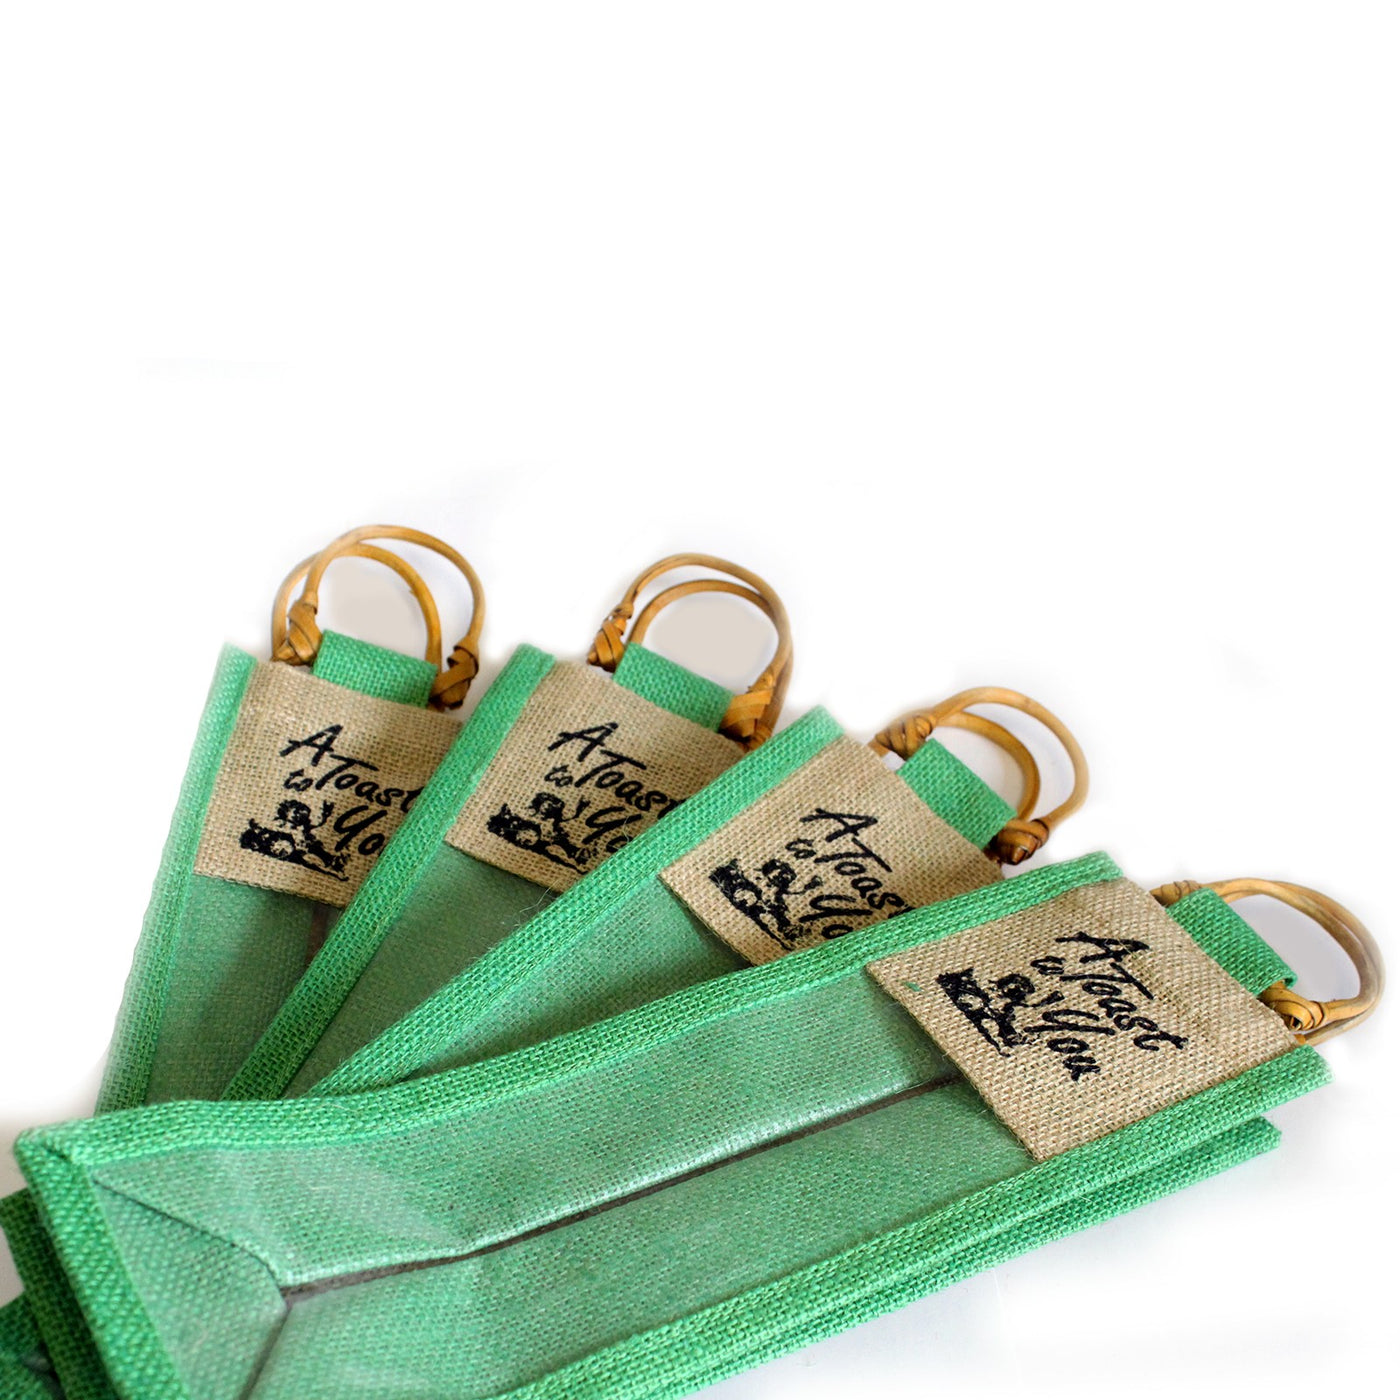 Natural Green Jute 'A Toast For You' Printed Wine Gift Bags With Clear Window And Cane Handle.